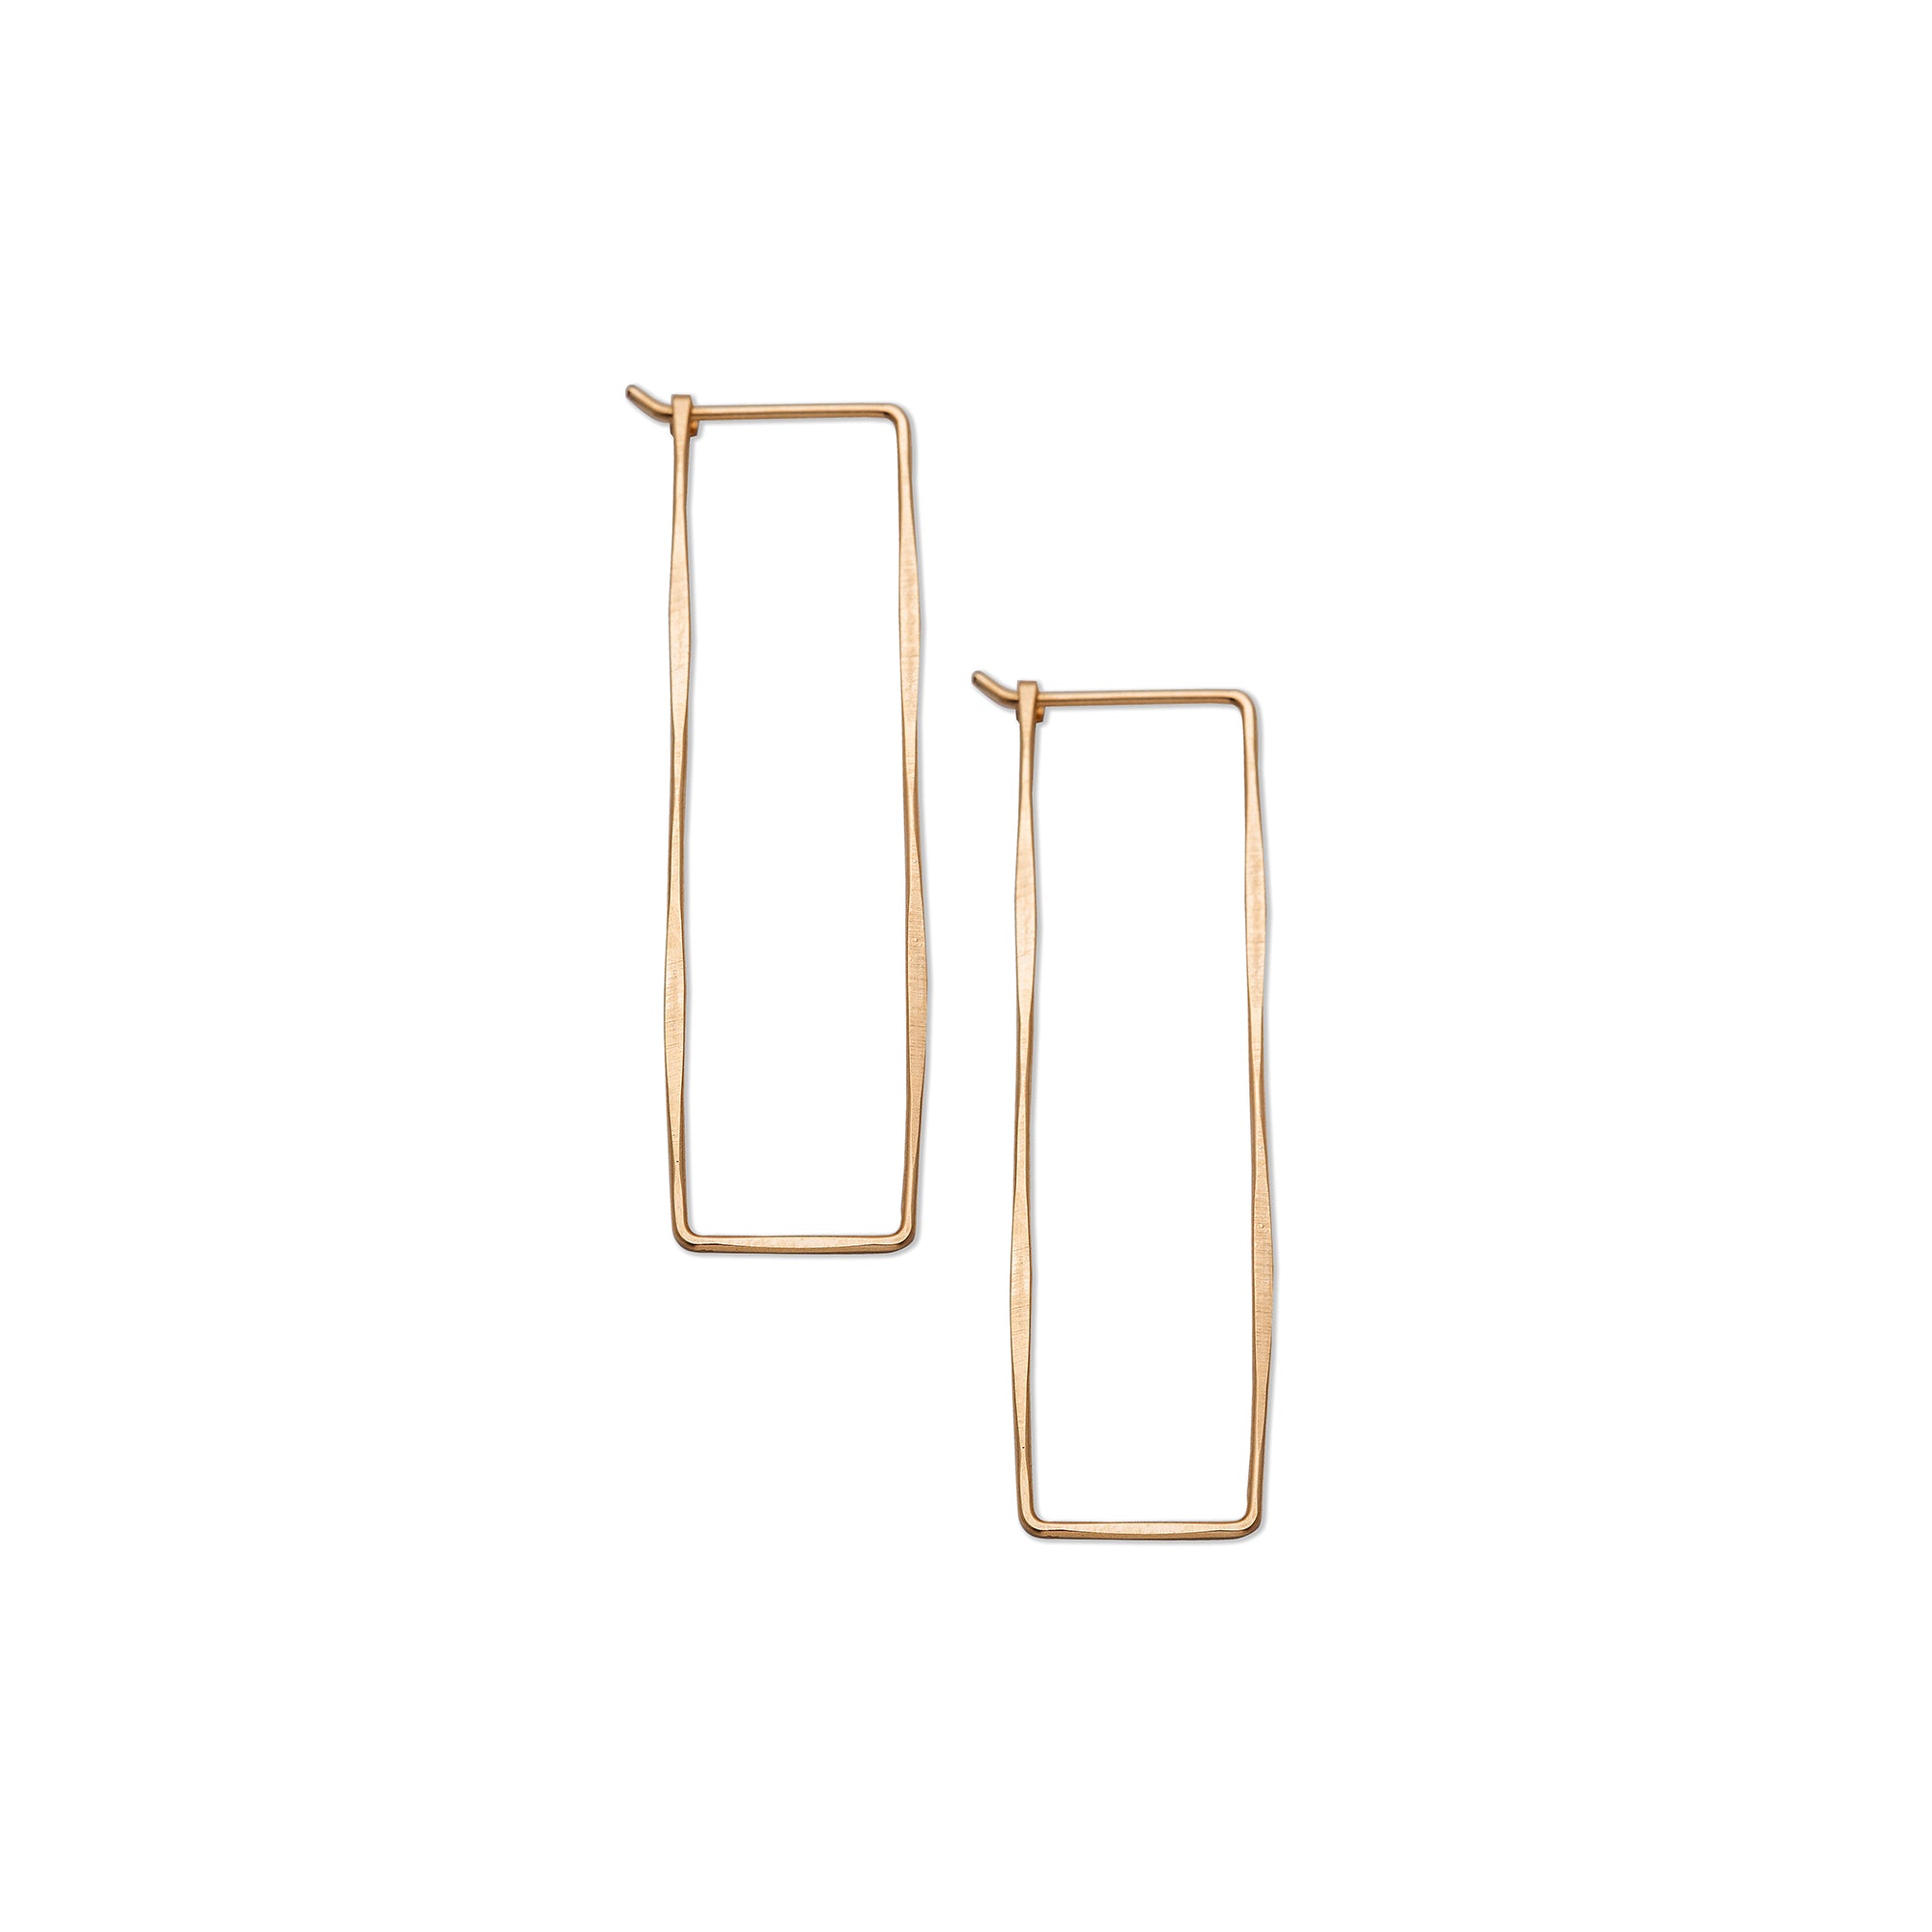 Simple and distinctive, these Rectangle Hoops are a striking, contemporary alternative to the traditional hoop